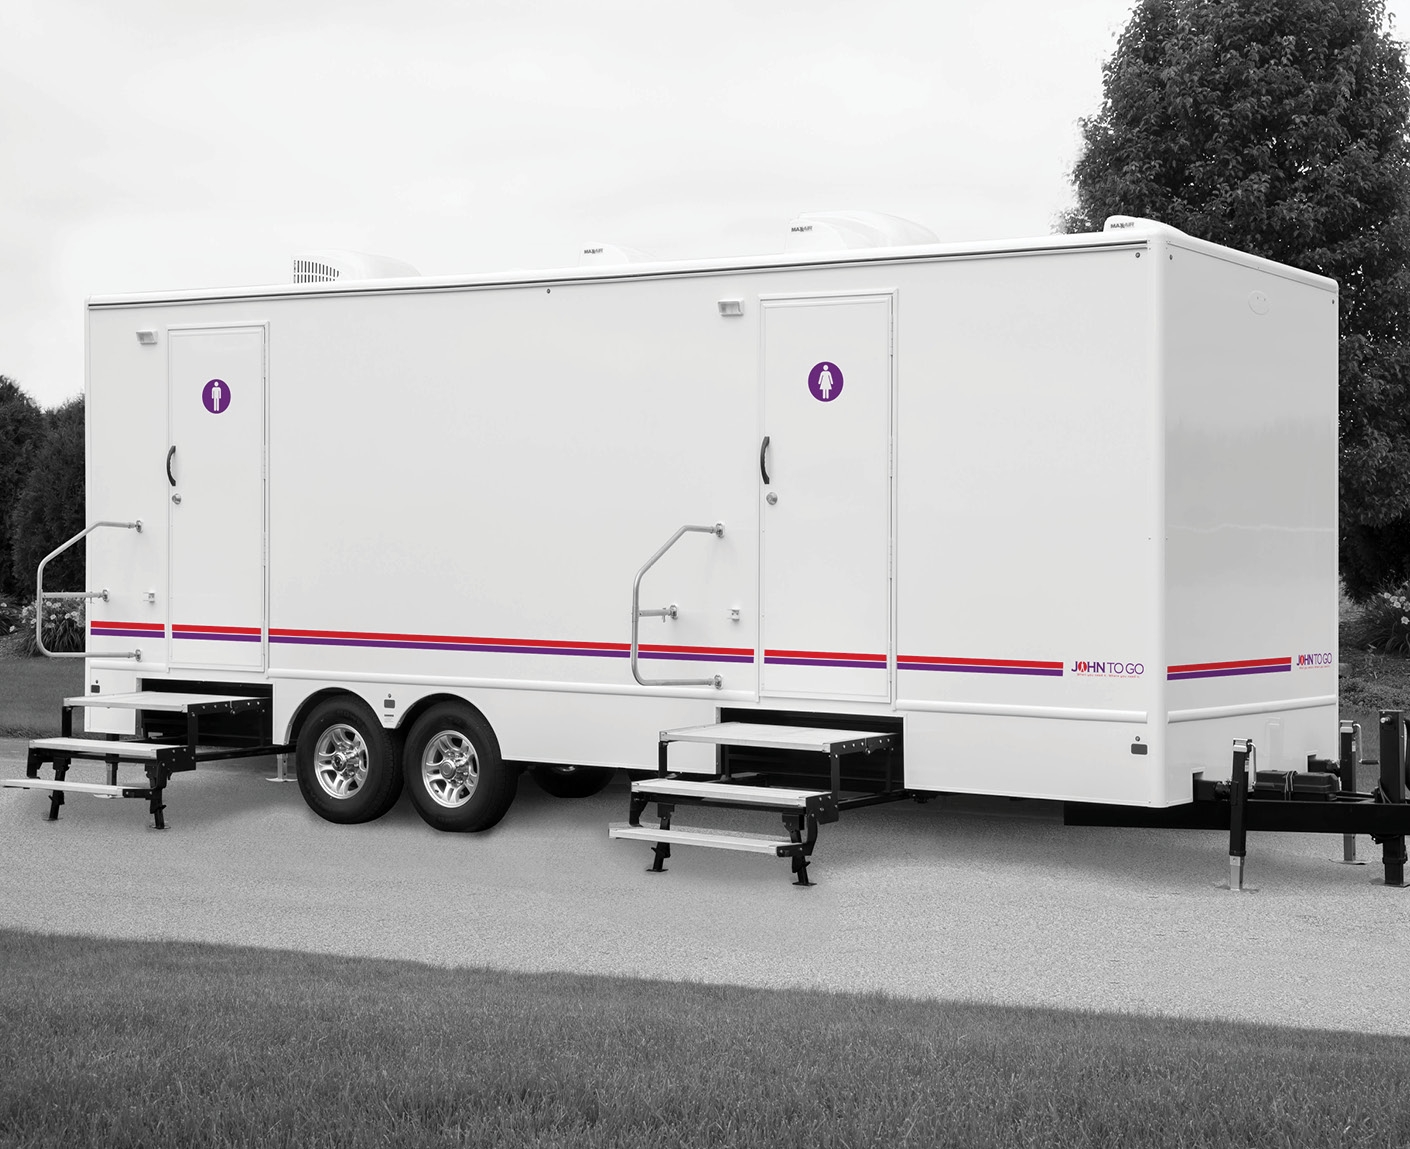 upscale wedding restroom trailers services